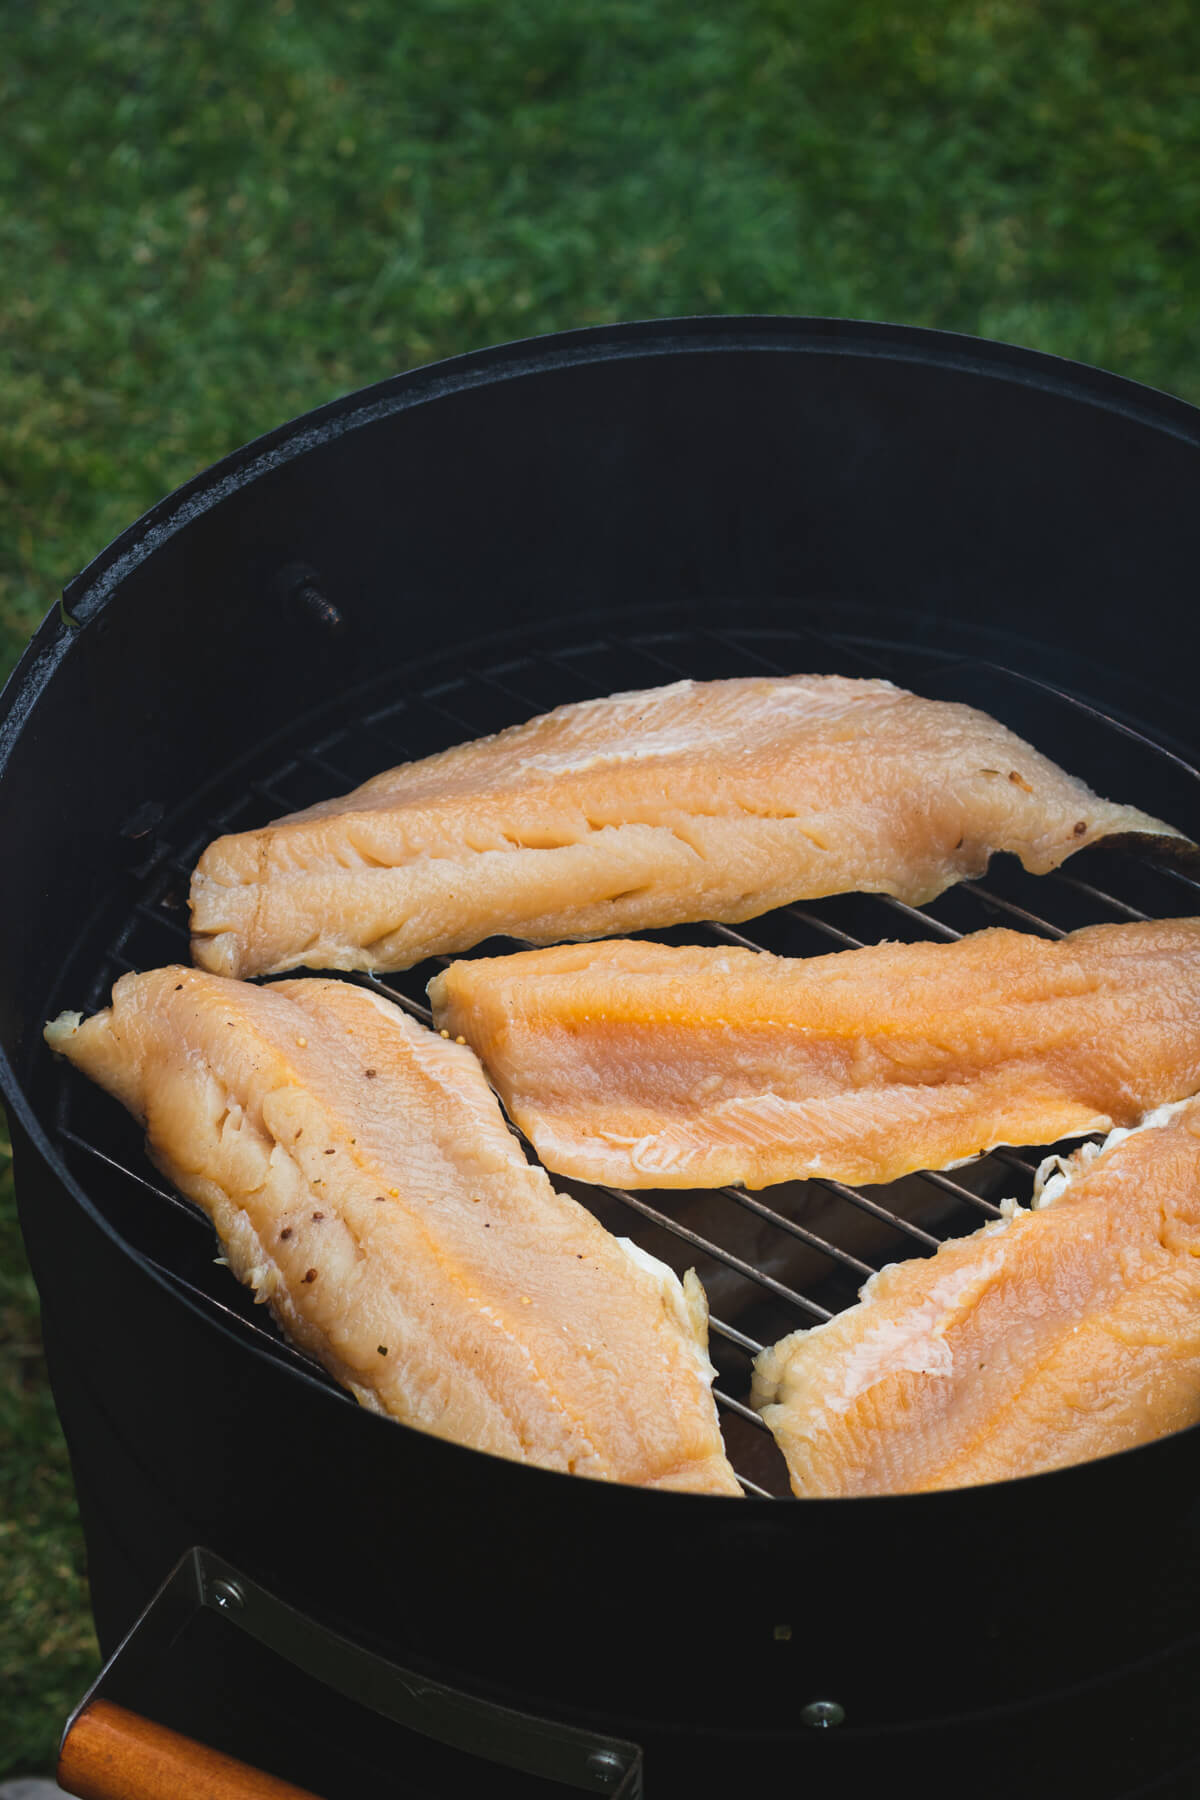 Four brined trout fillets on a smoker grill.